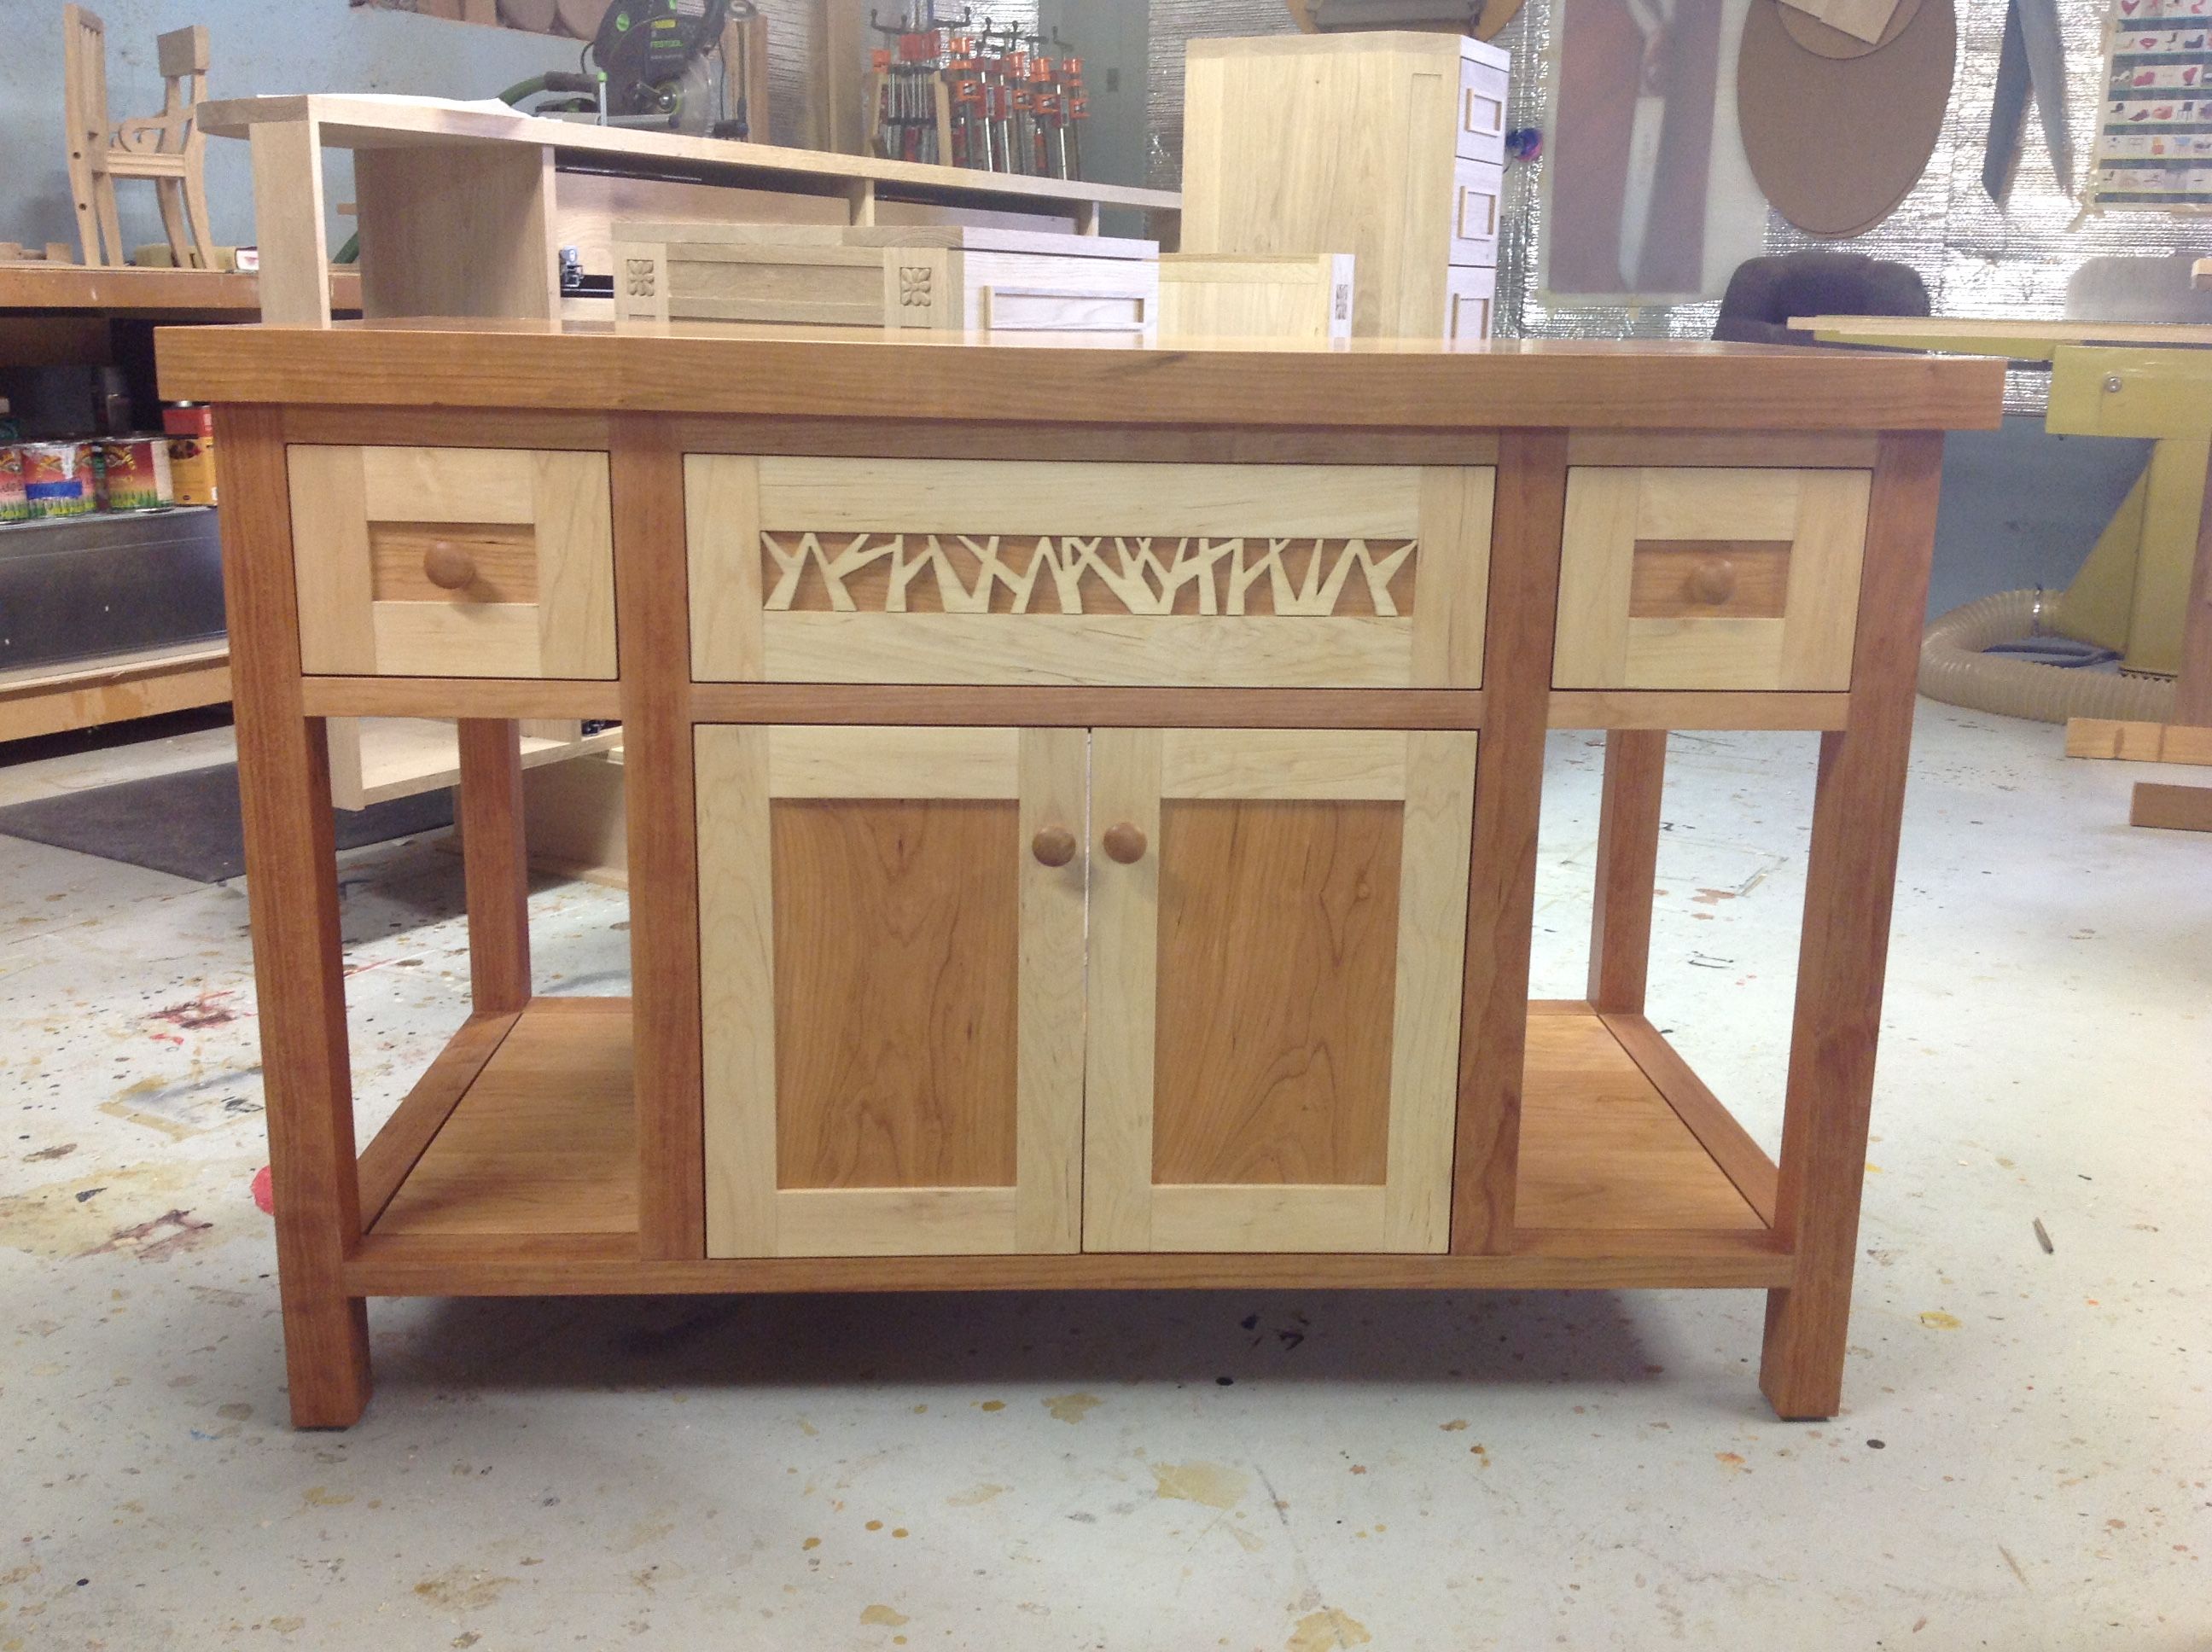 Buy Hand Made Bathroom Vanity Or Any Cabinet With Details Made To